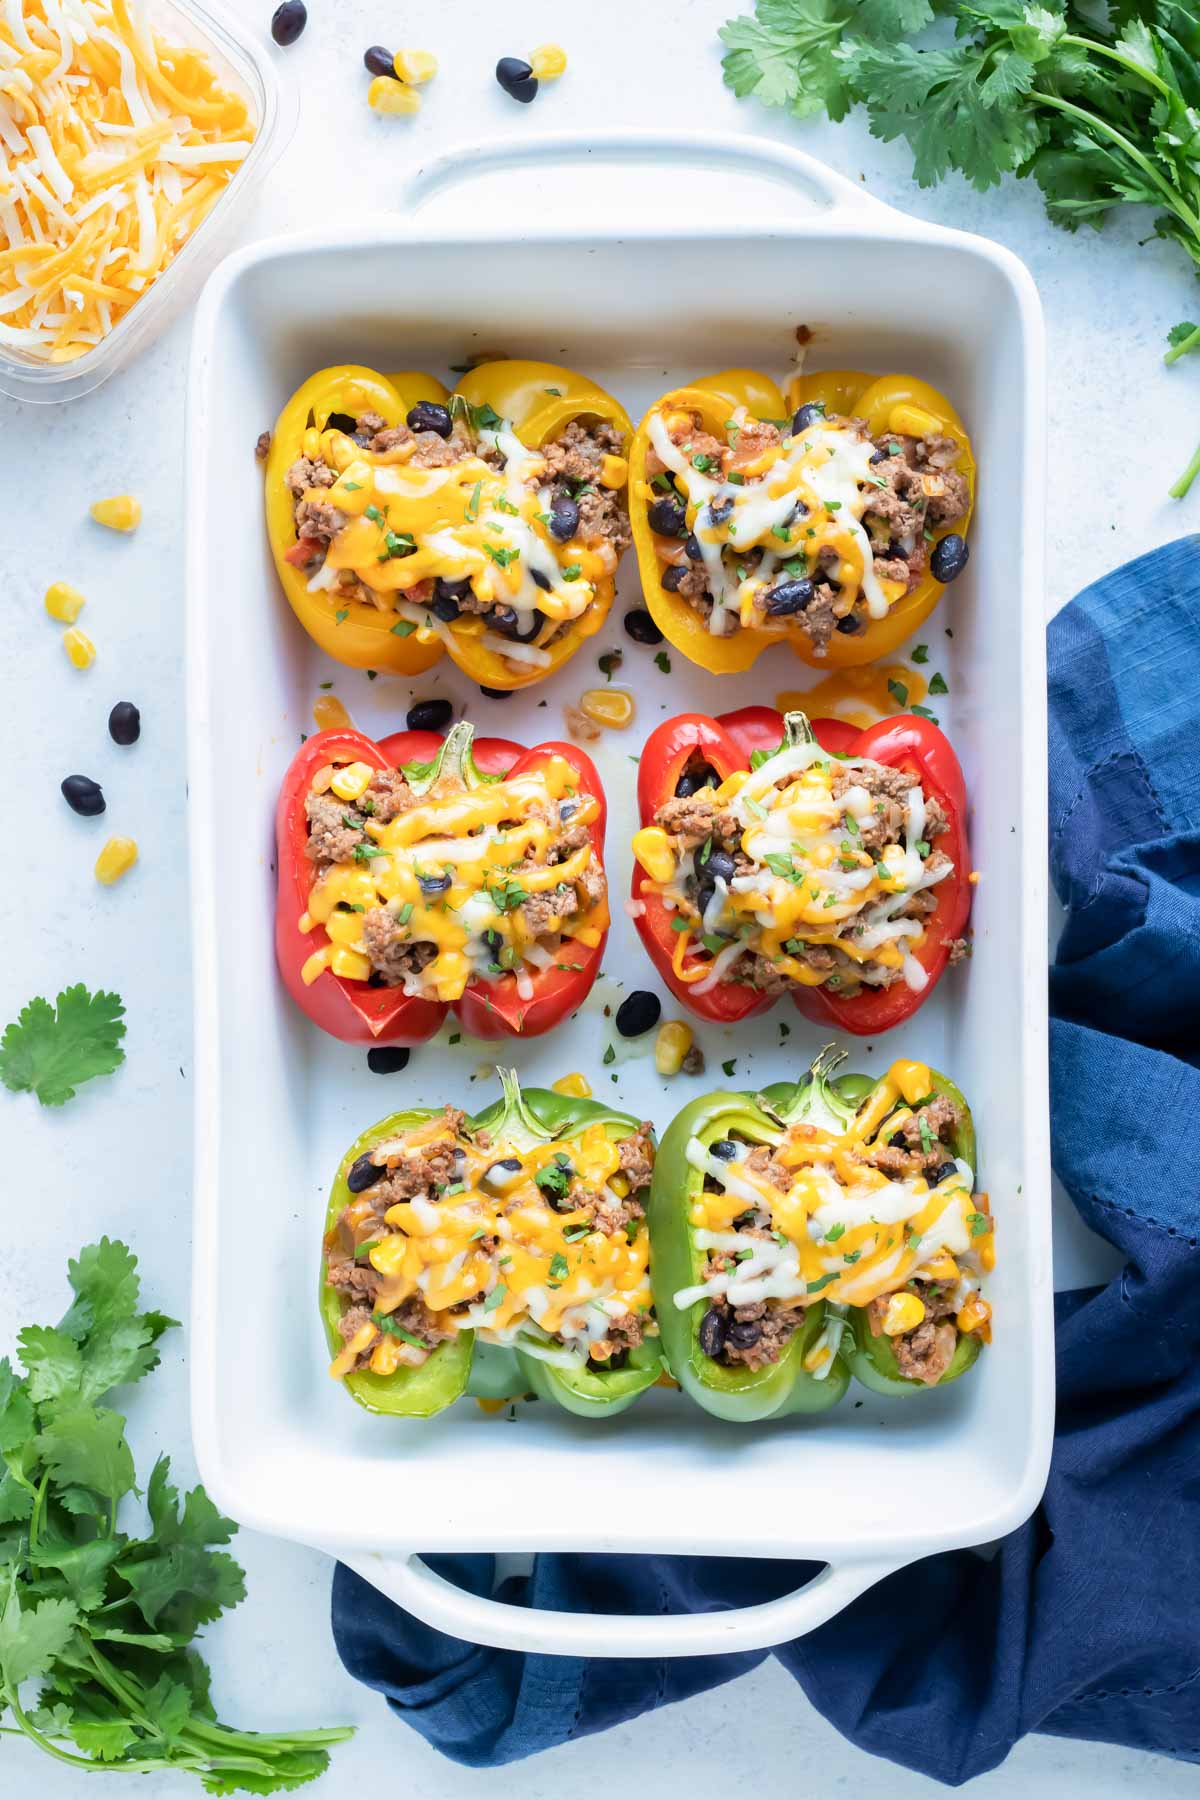 Taco stuffed bell peppers are shown on the counter.